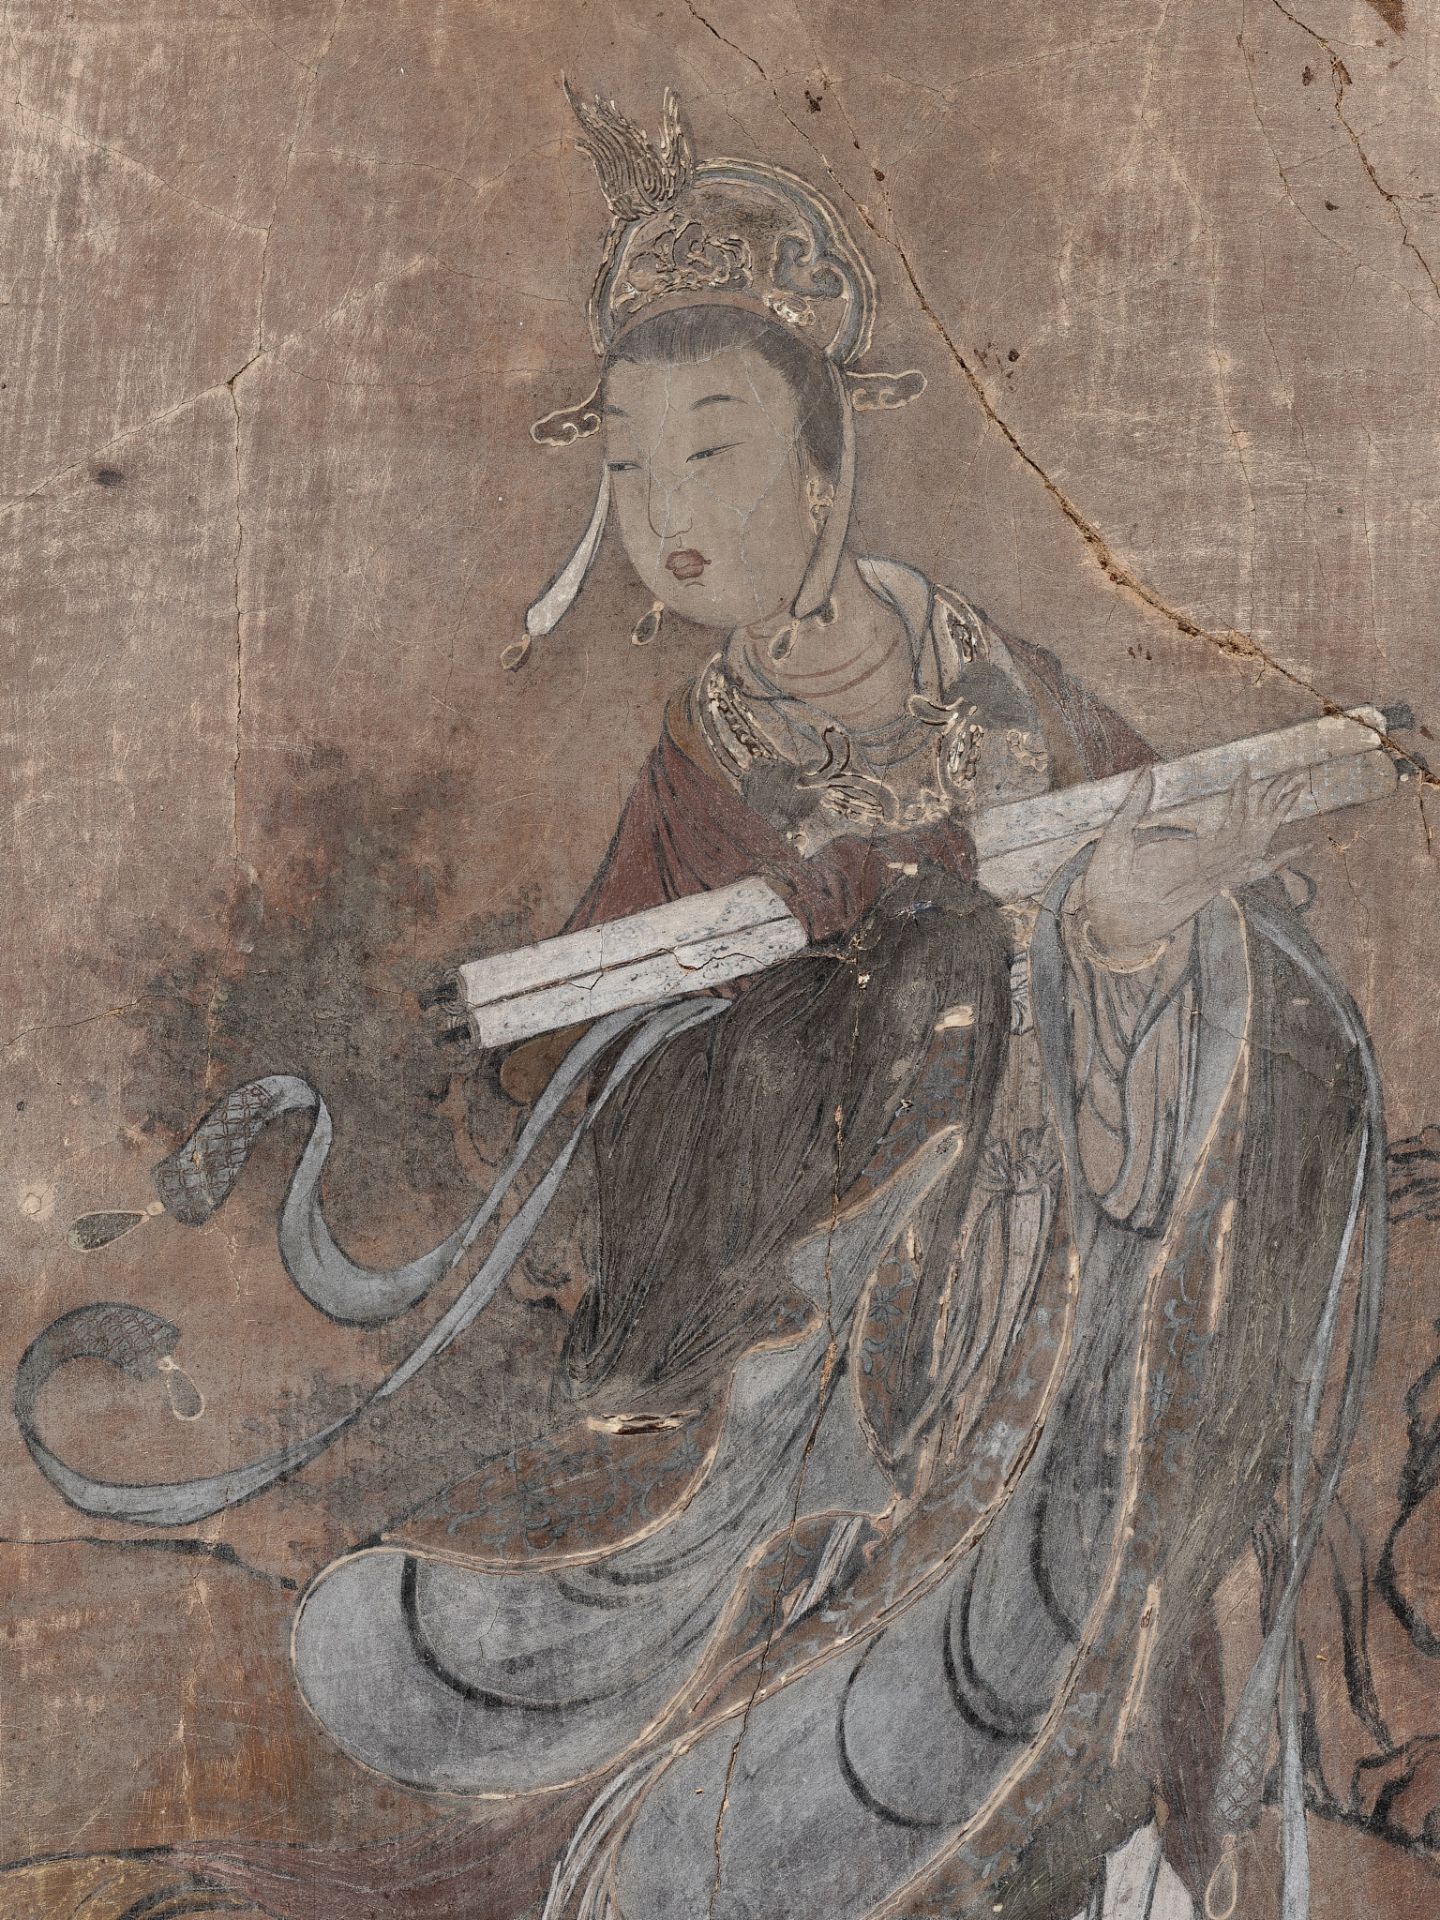 A STUCCO FRESCO FRAGMENT DEPICTING A CELESTIAL MAIDEN, YUAN TO MING DYNASTY